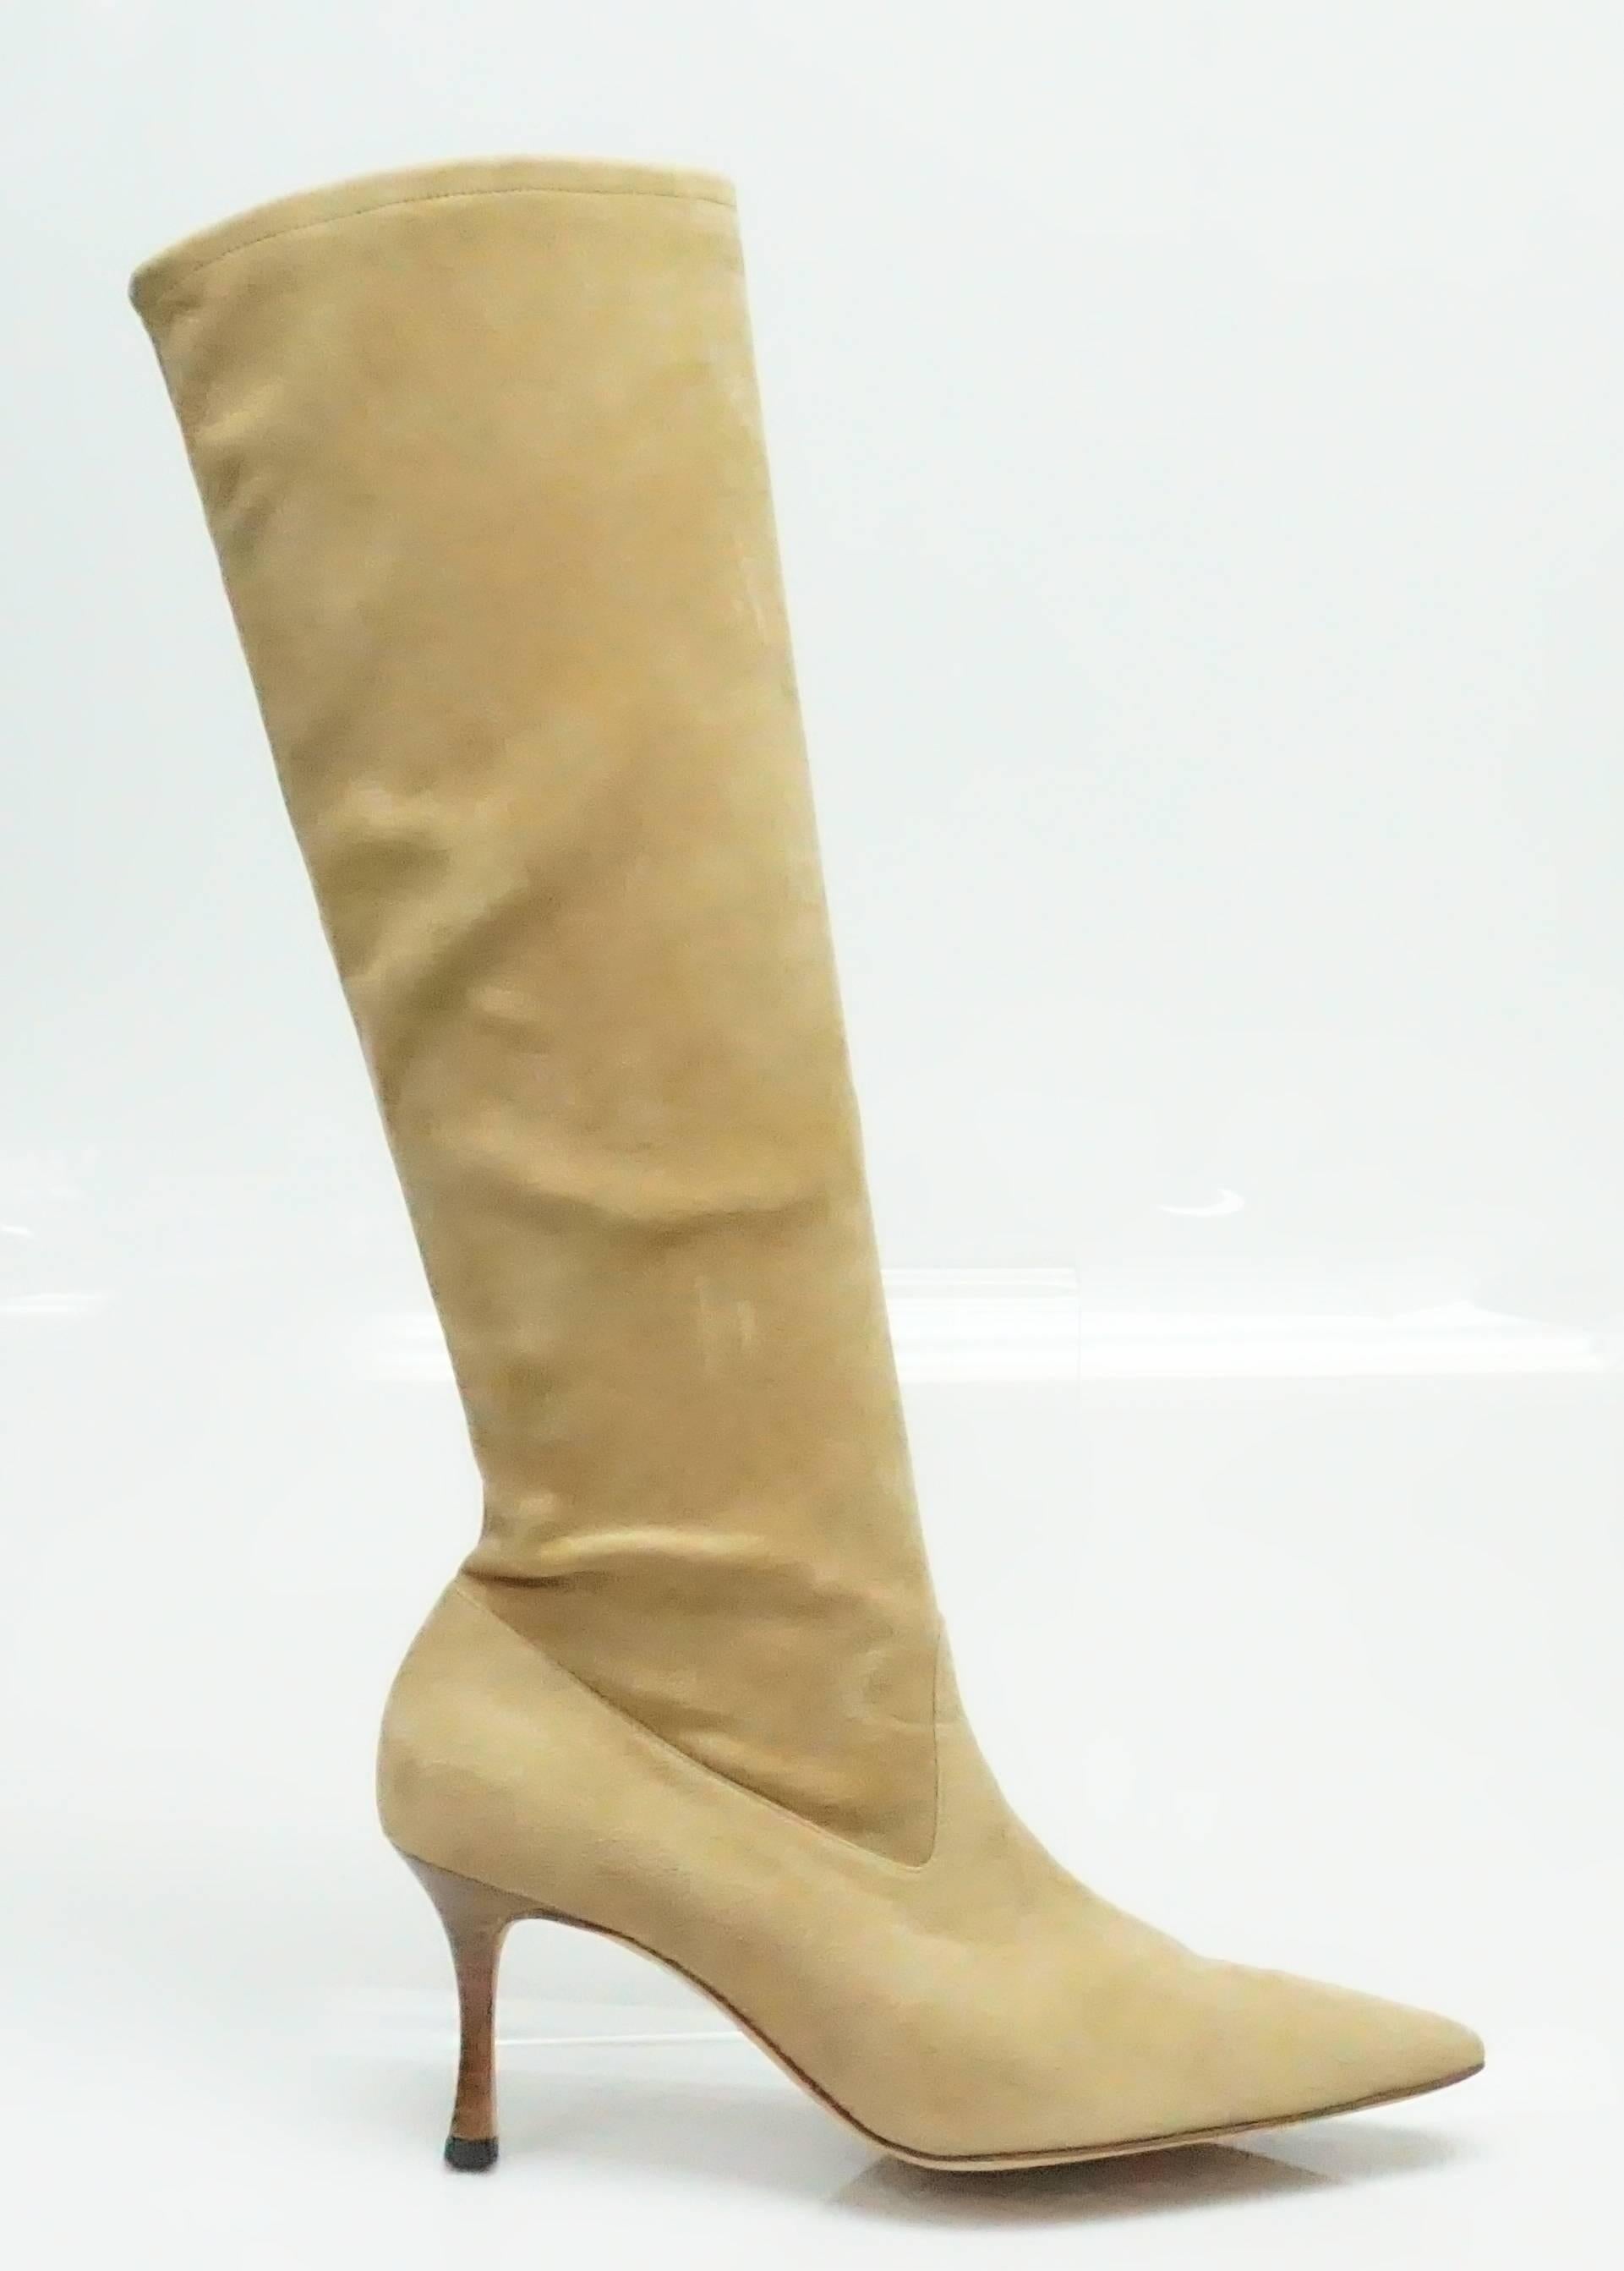 Manolo Blahnik Camel Suede Tall Boot - 38.5  These beautiful boots are in very good condition. They have stretch and do not have a zip. The heel is a stacked wood stiletto that is 3